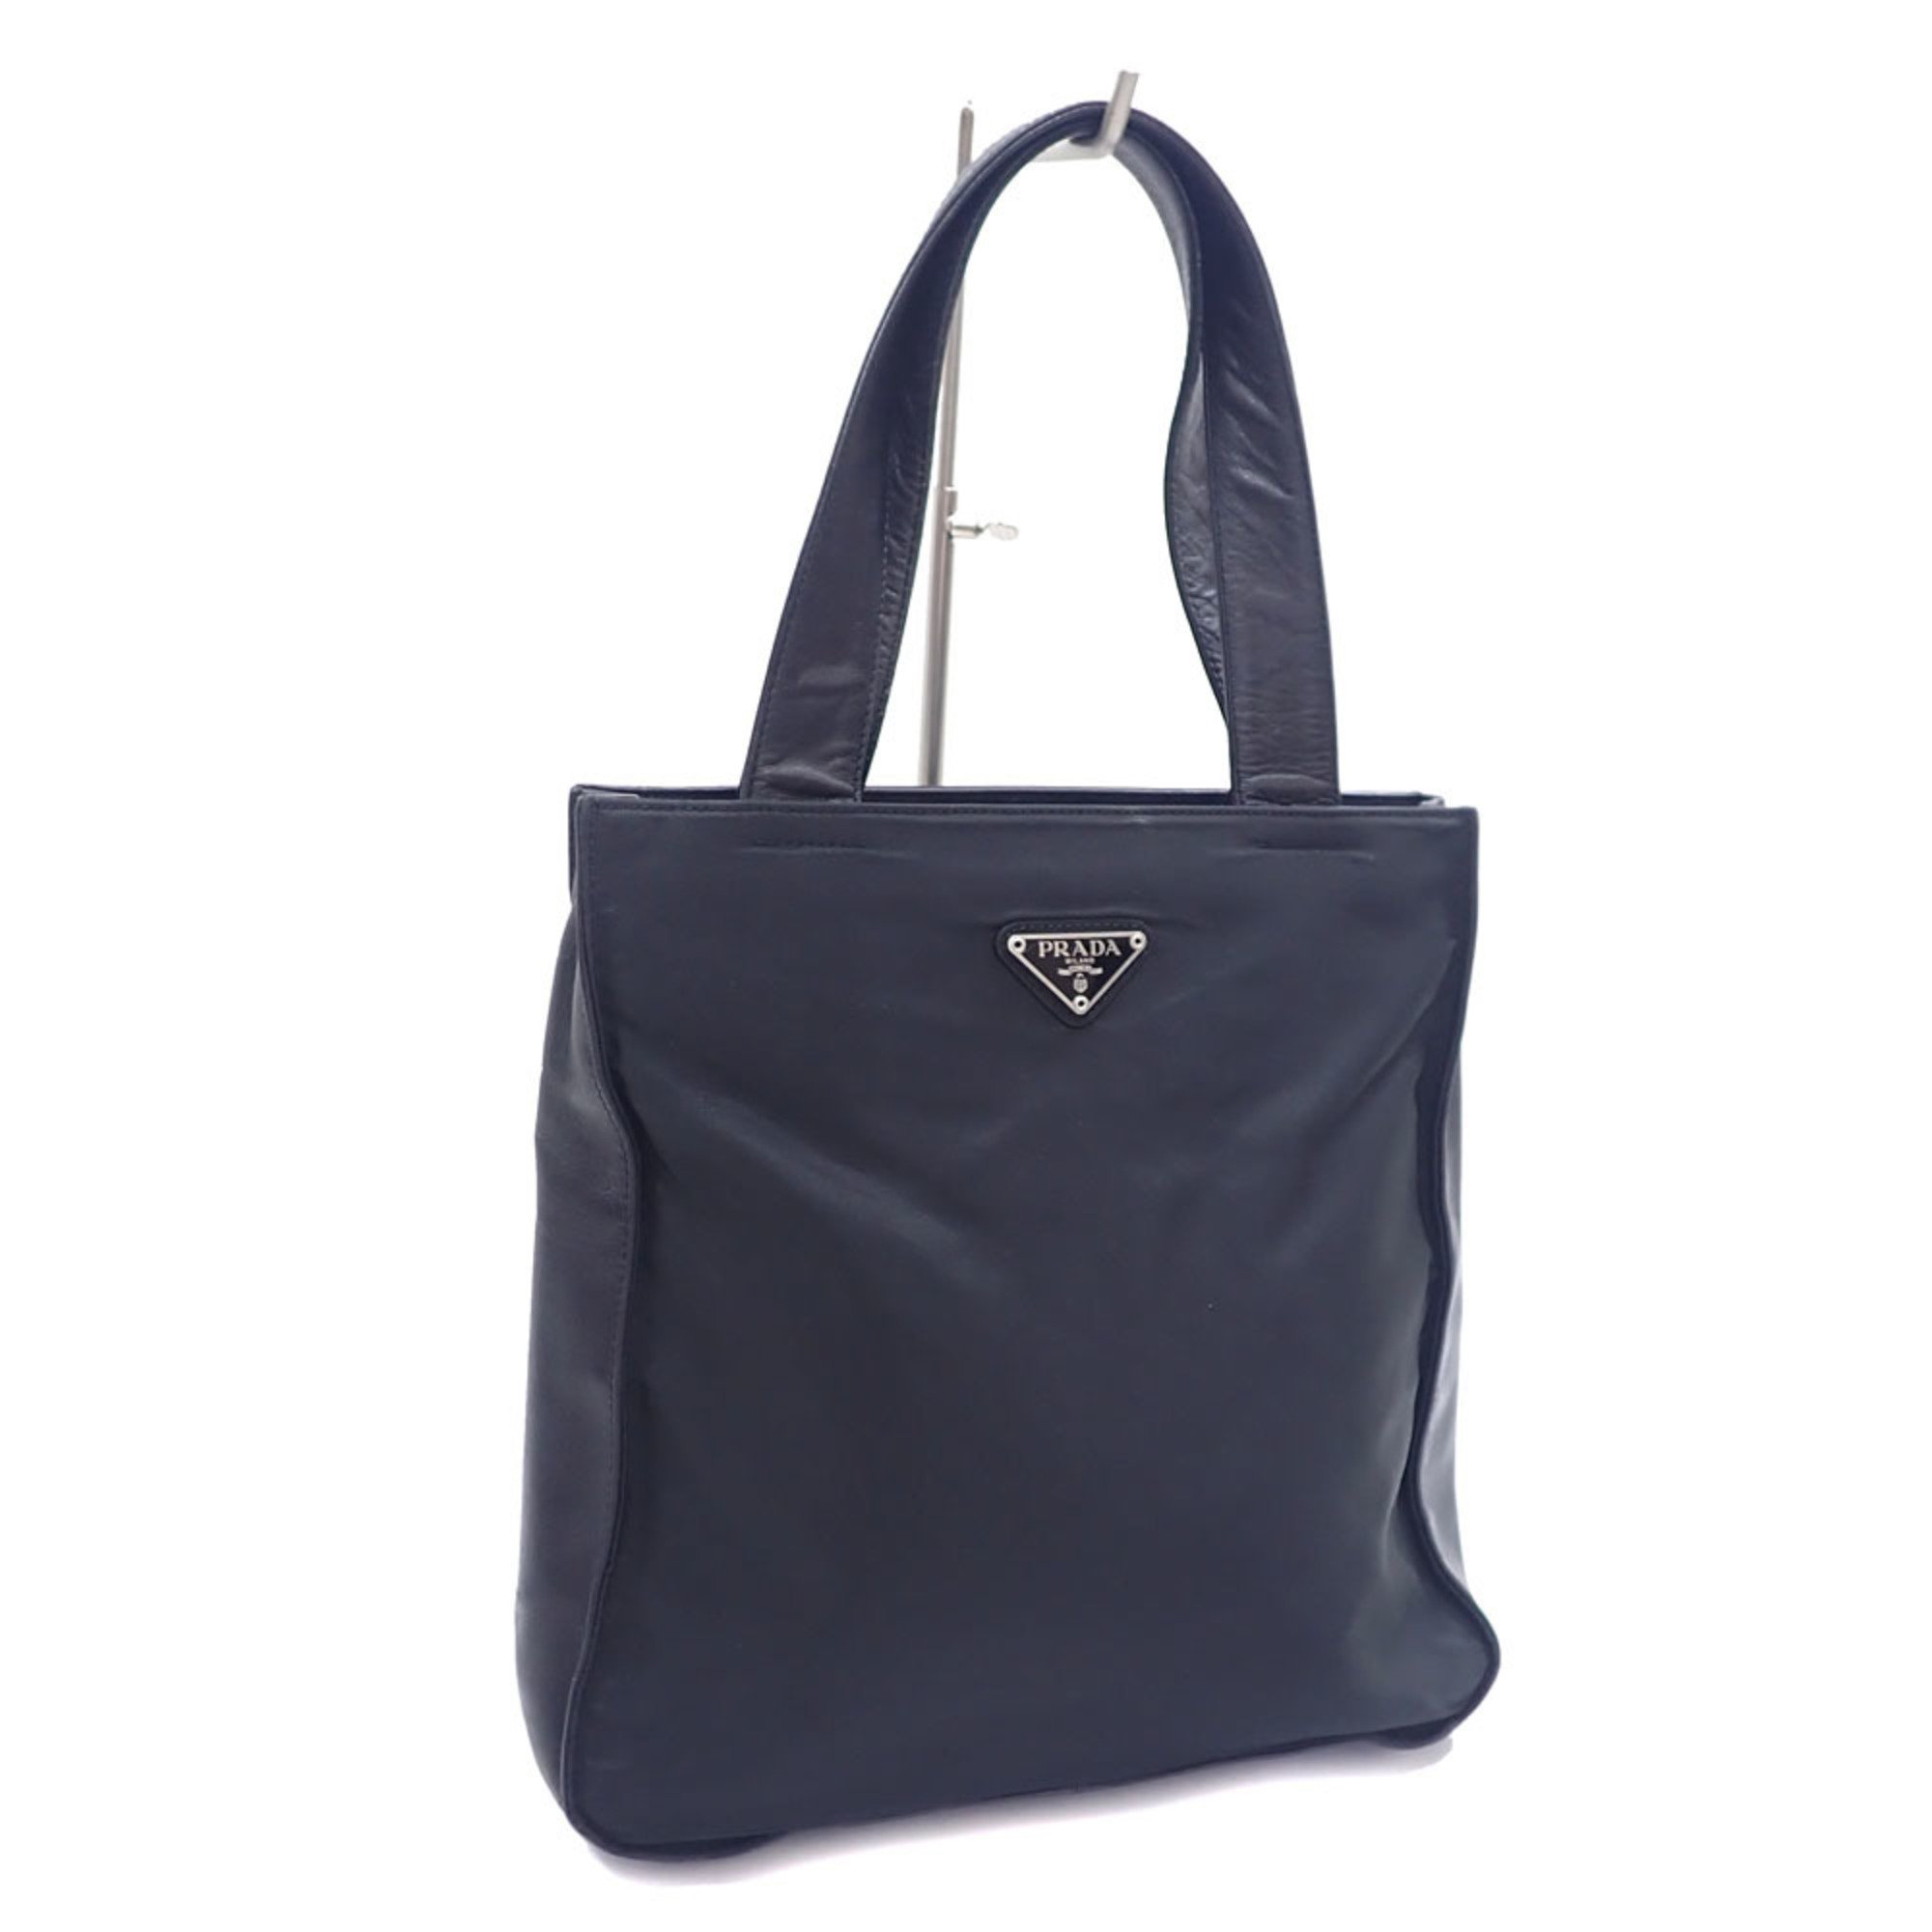 Prada tote bag for women in black, nylon and leather